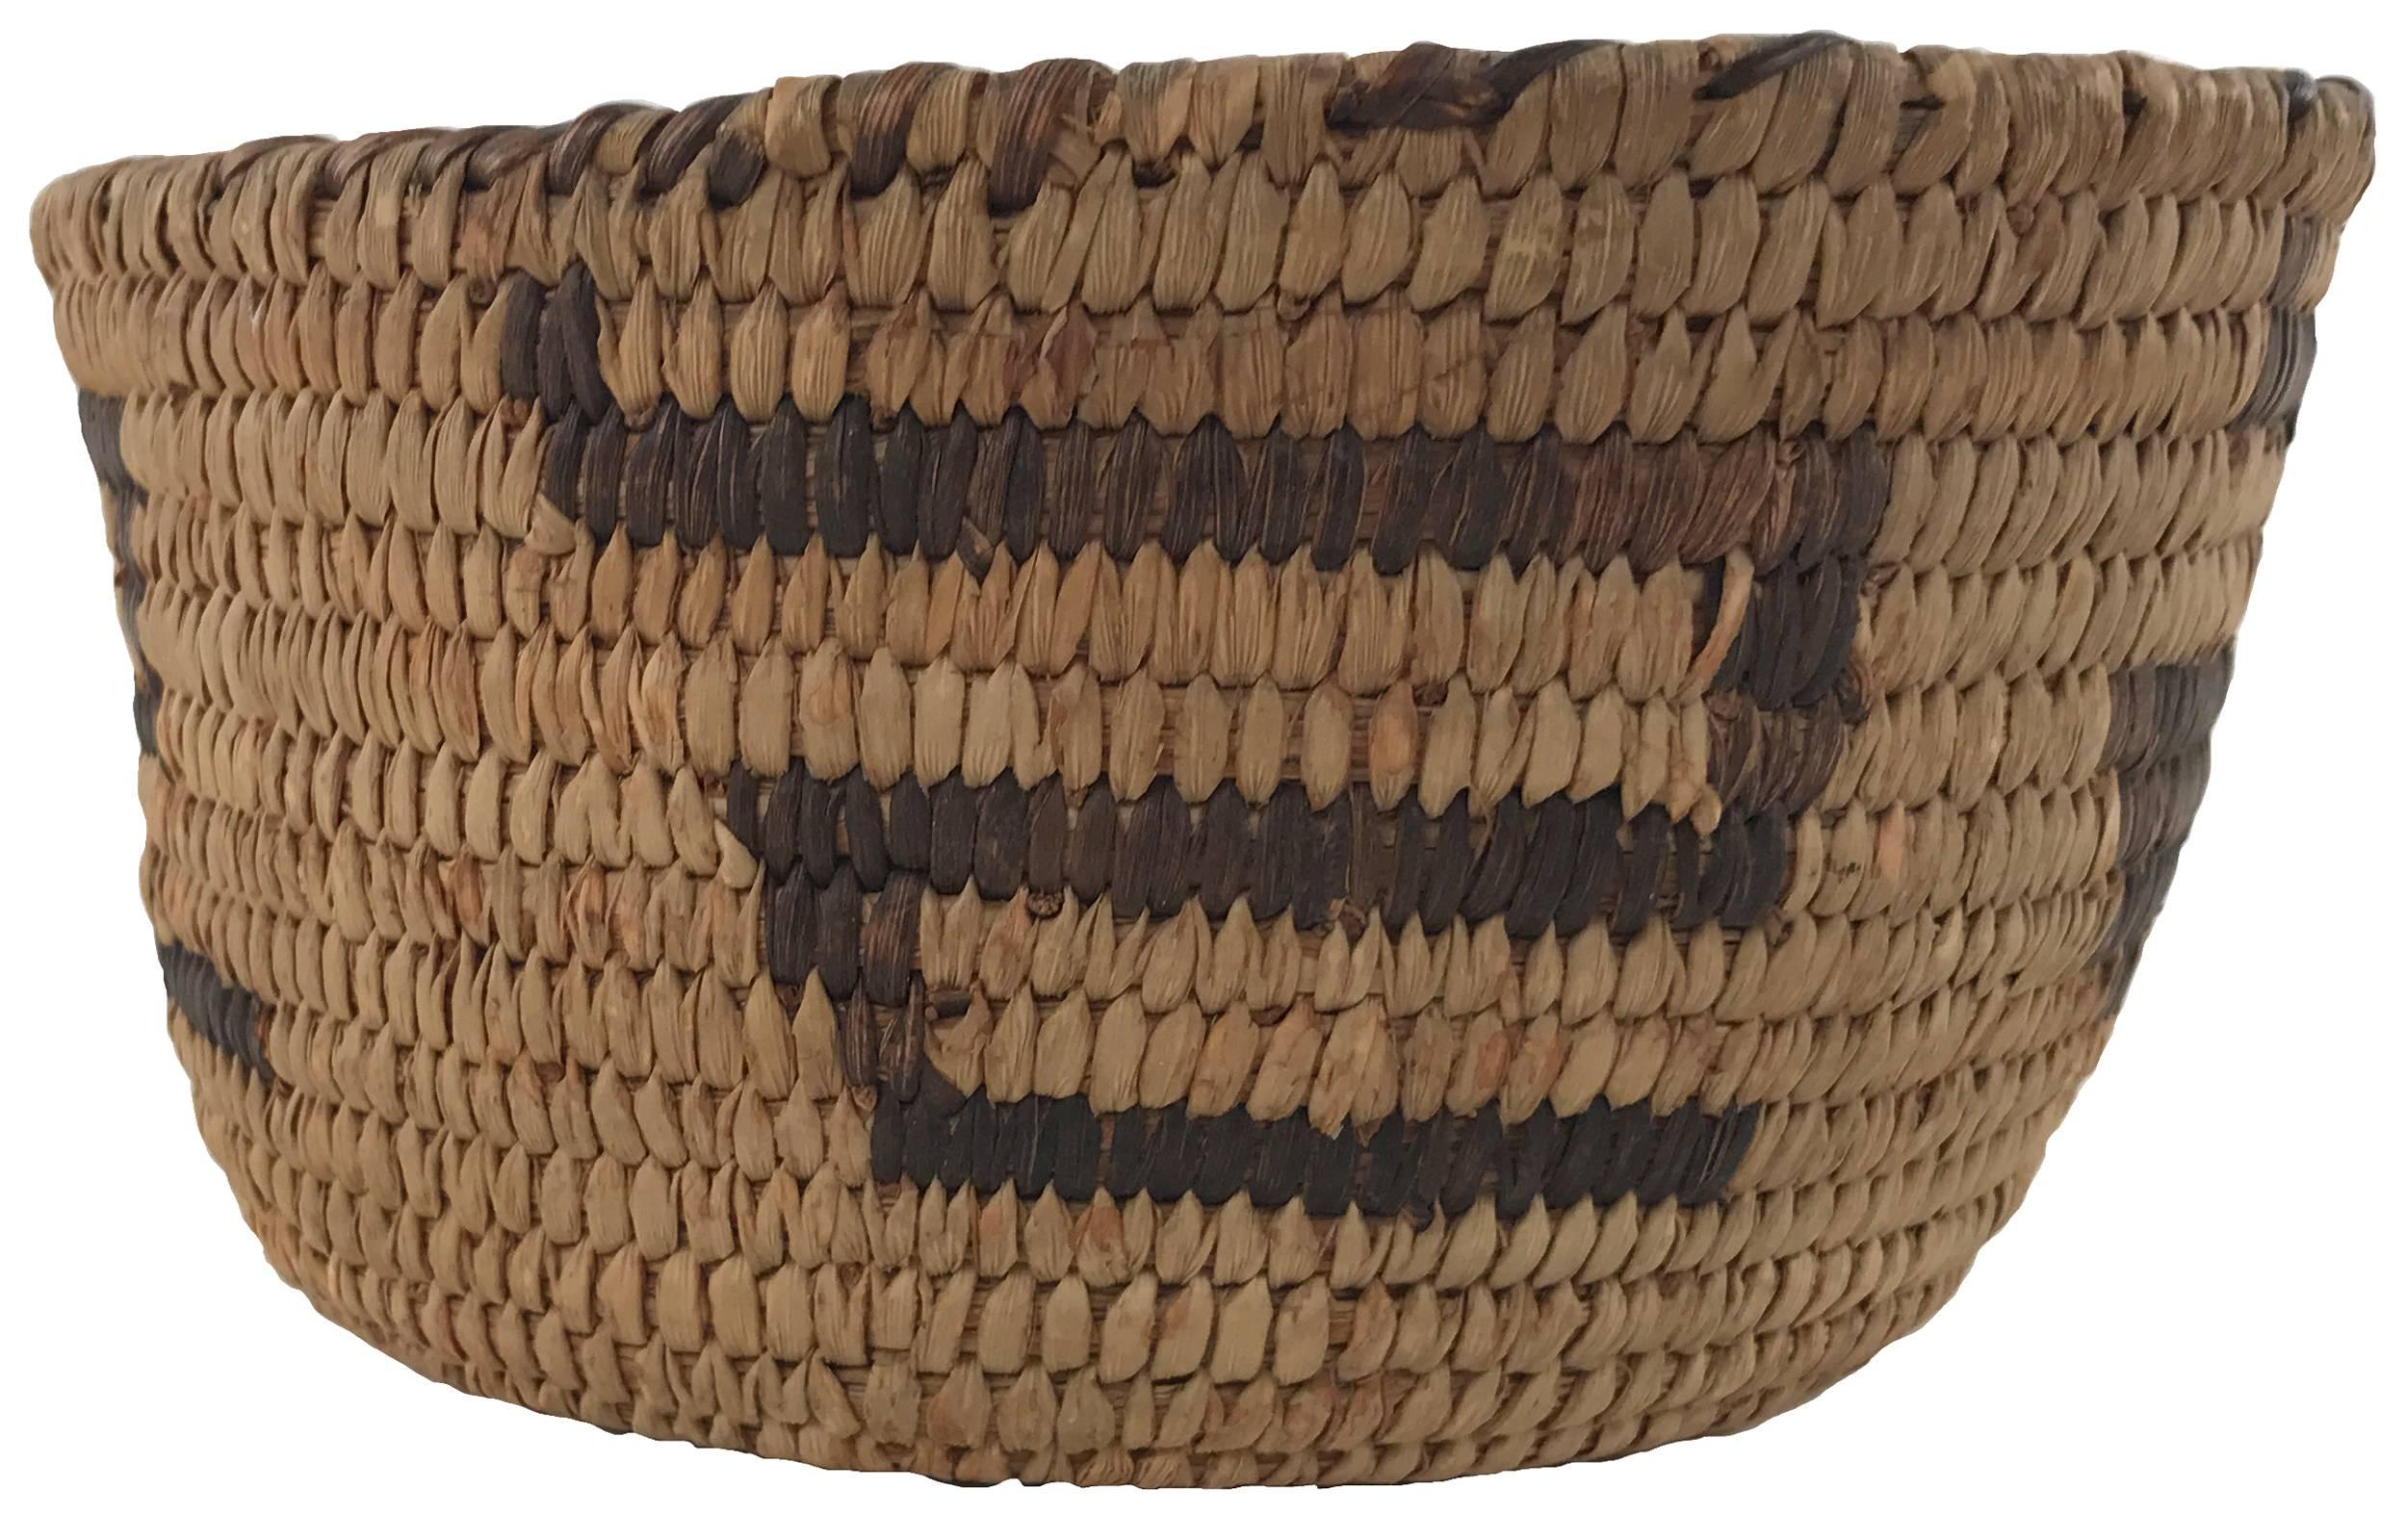 A small 19th century Native American twined woven bowl with contrasting dark snake or zig-zag motif around body of form.